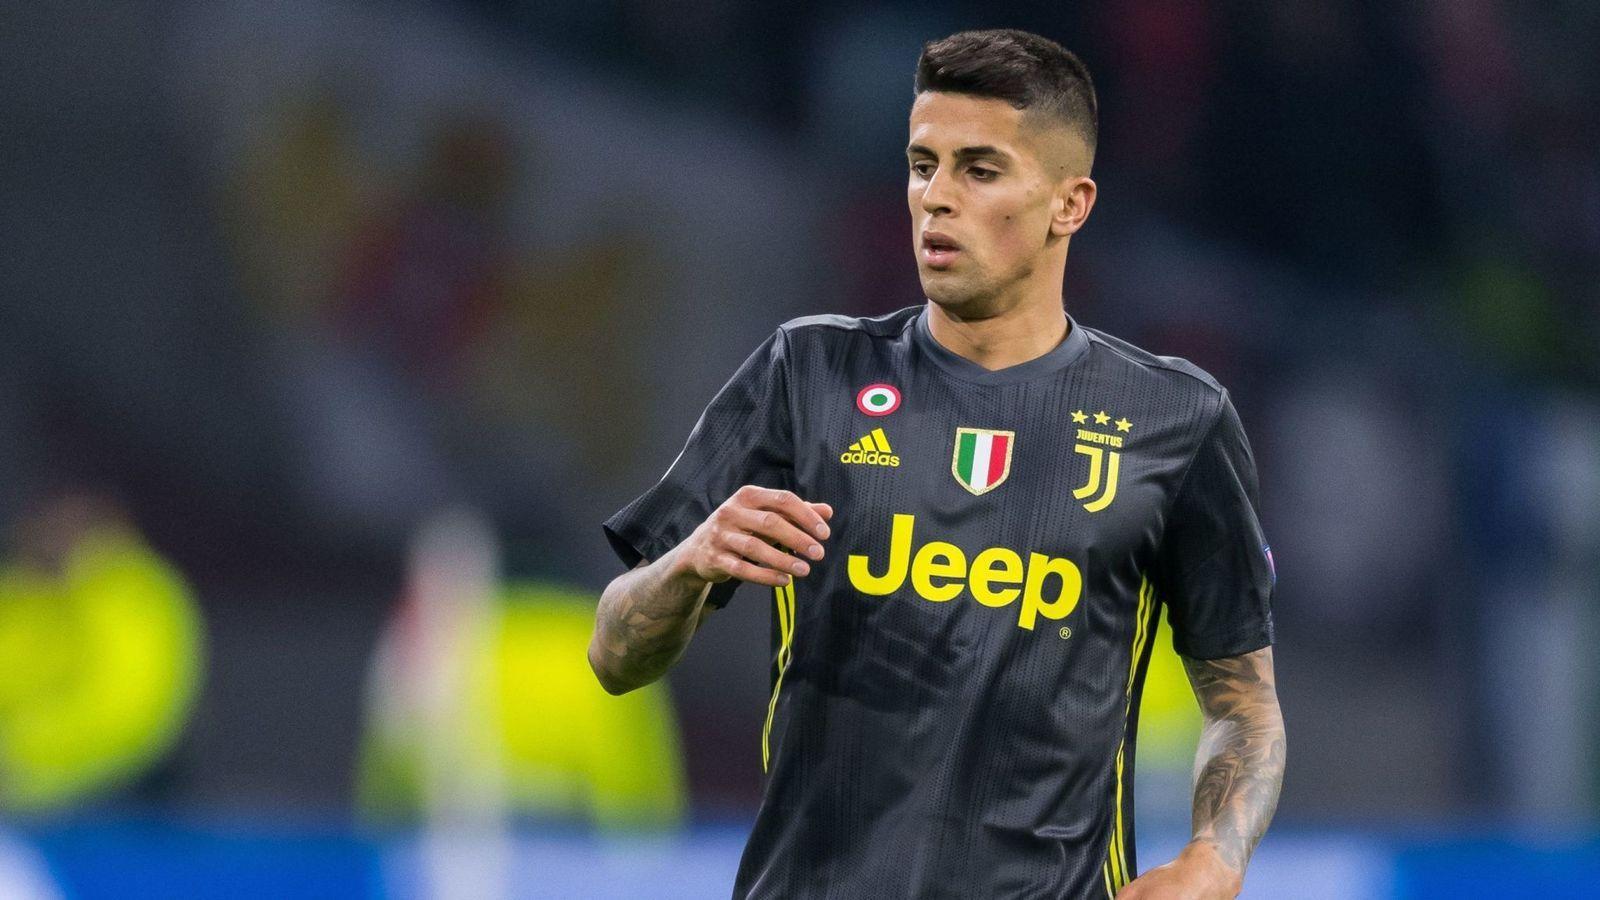 Joao Cancelo joins Man City from Juventus with Danilo moving